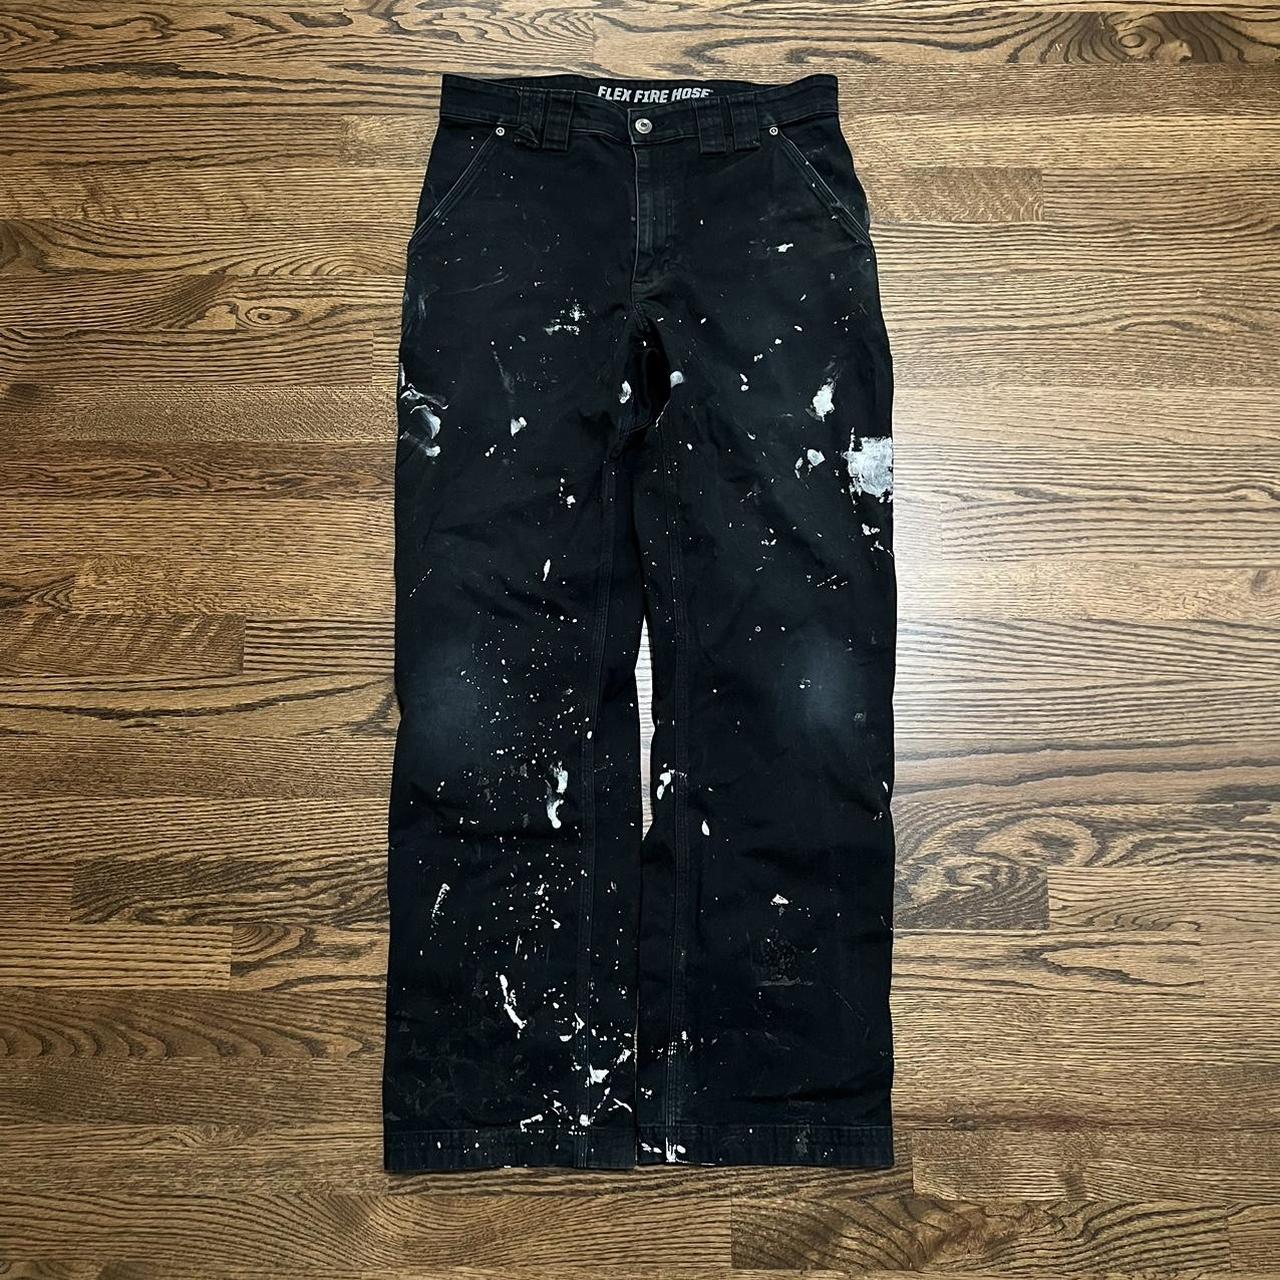 Duluth Trading Company Men's Black and White Jeans